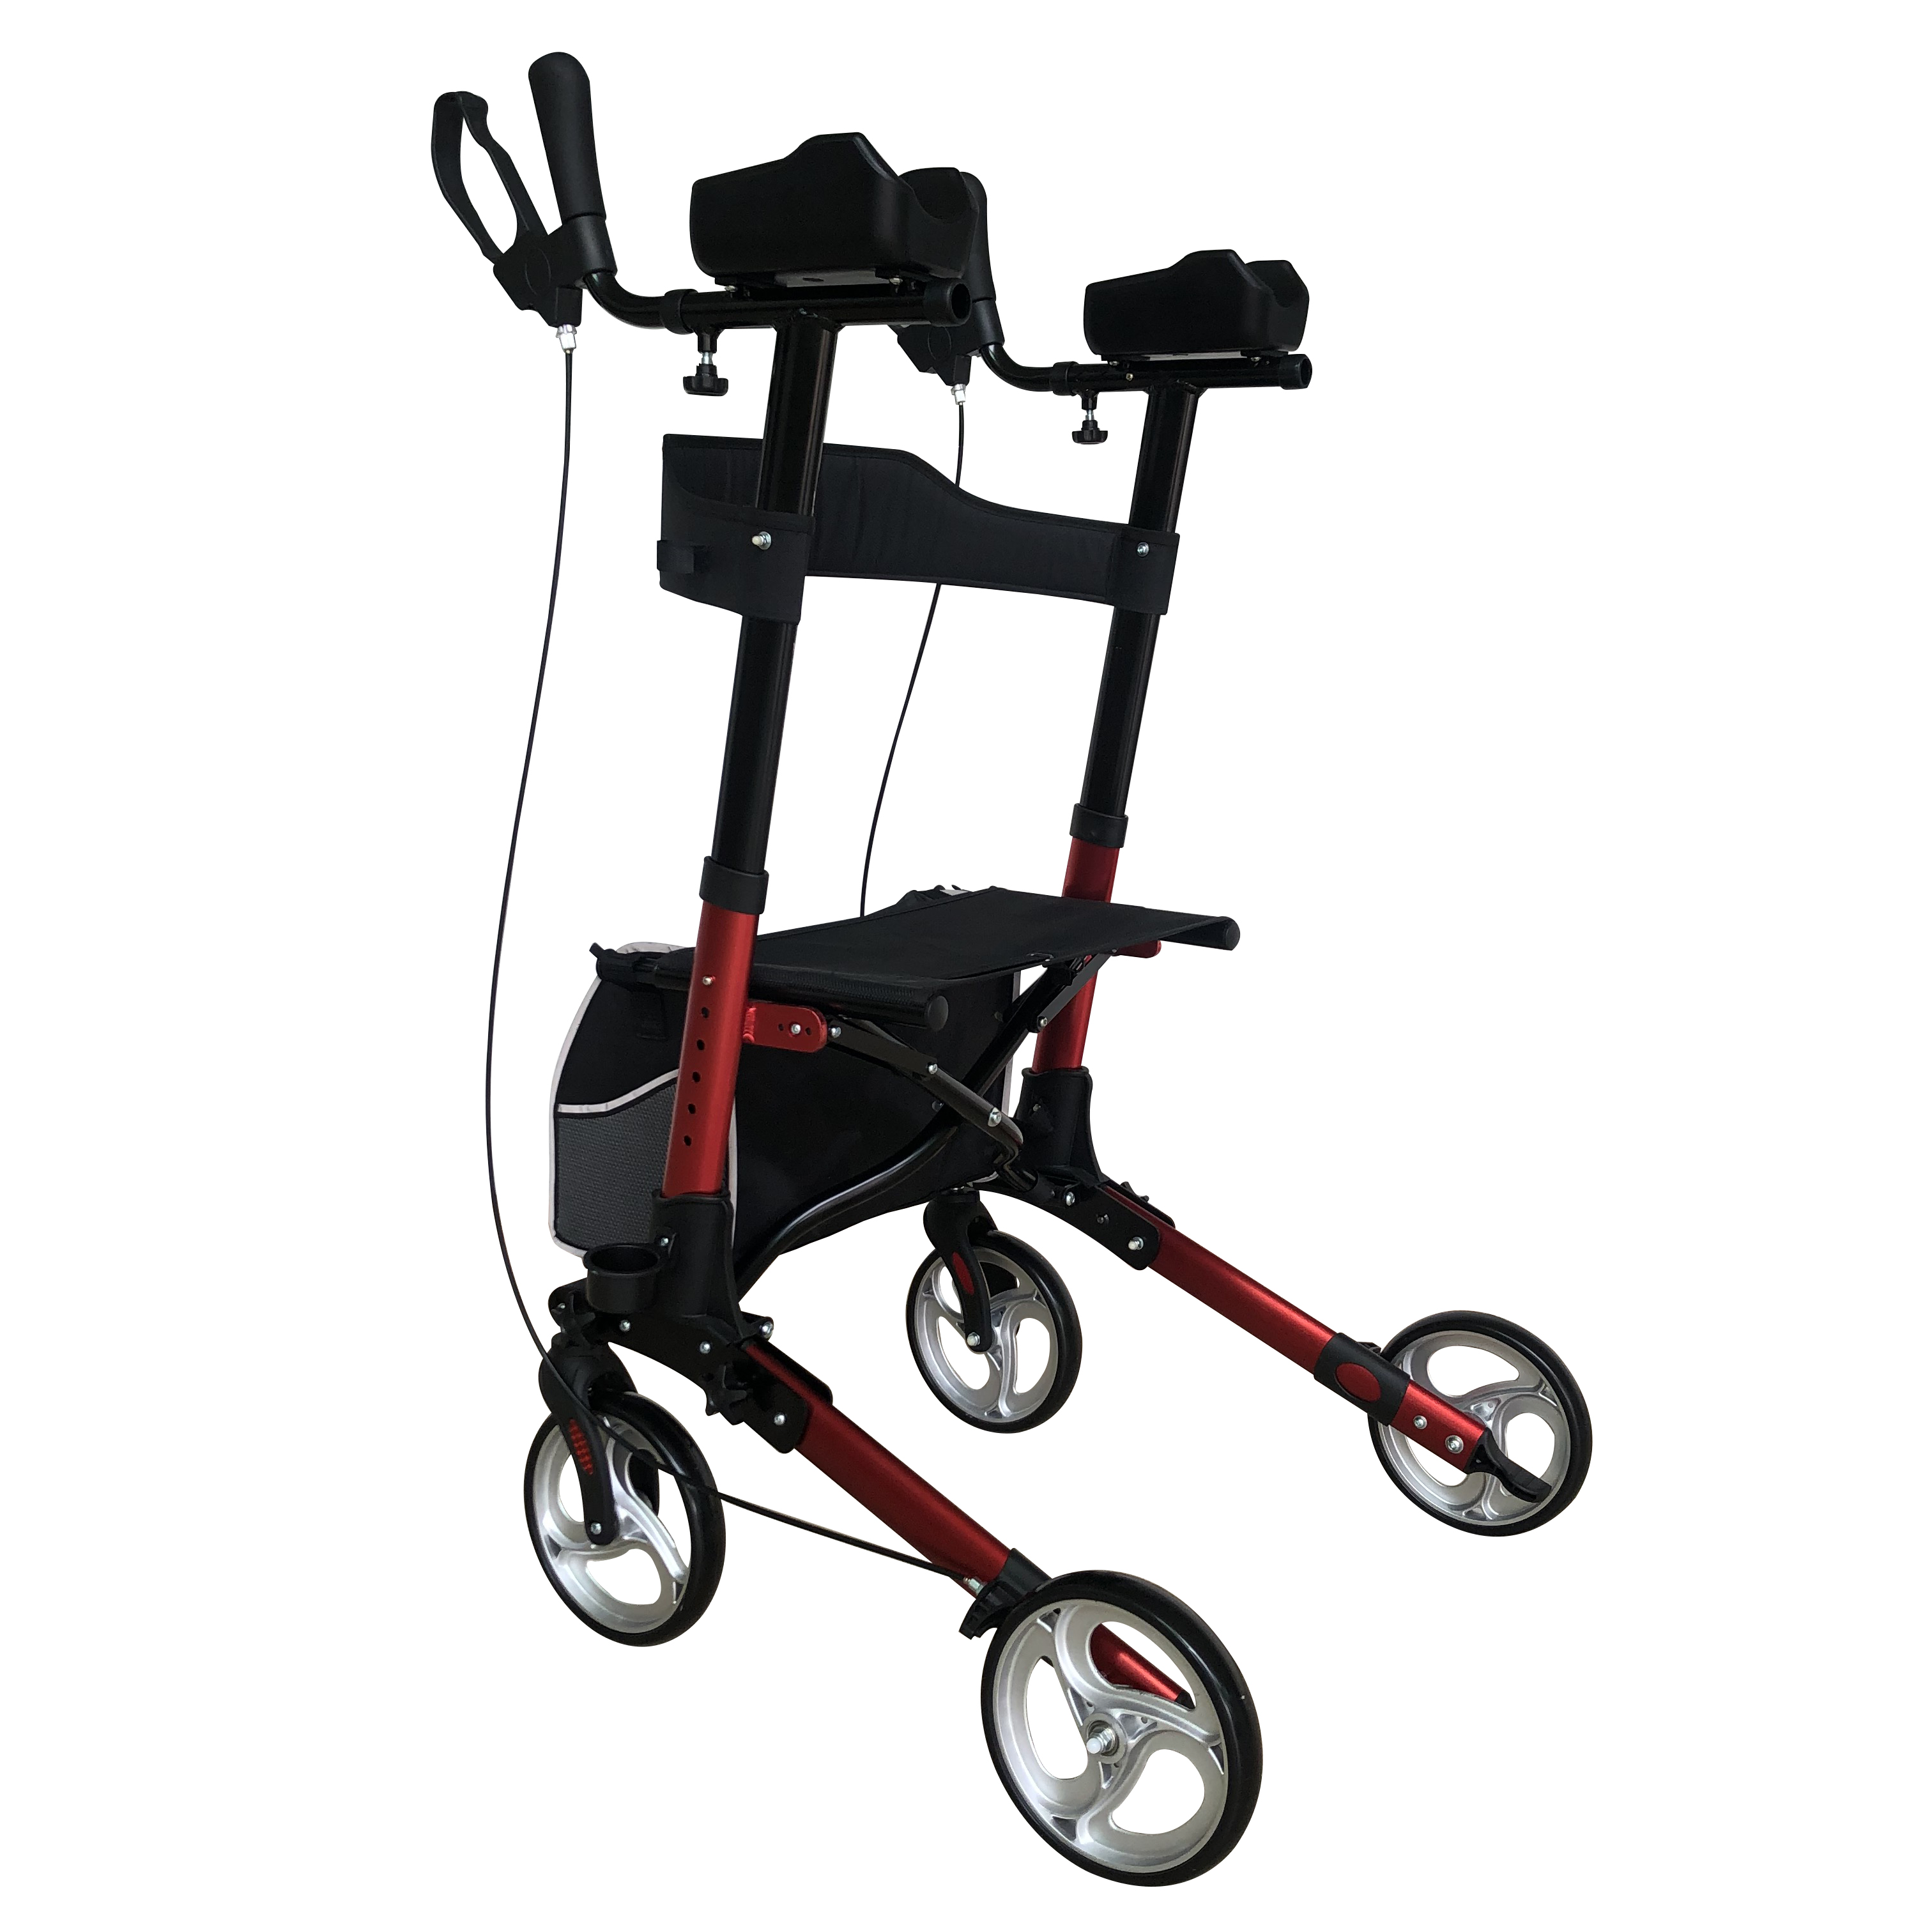 Aluminum Upright Rollator Walkers with Armrests, Handrails and Cup Holder